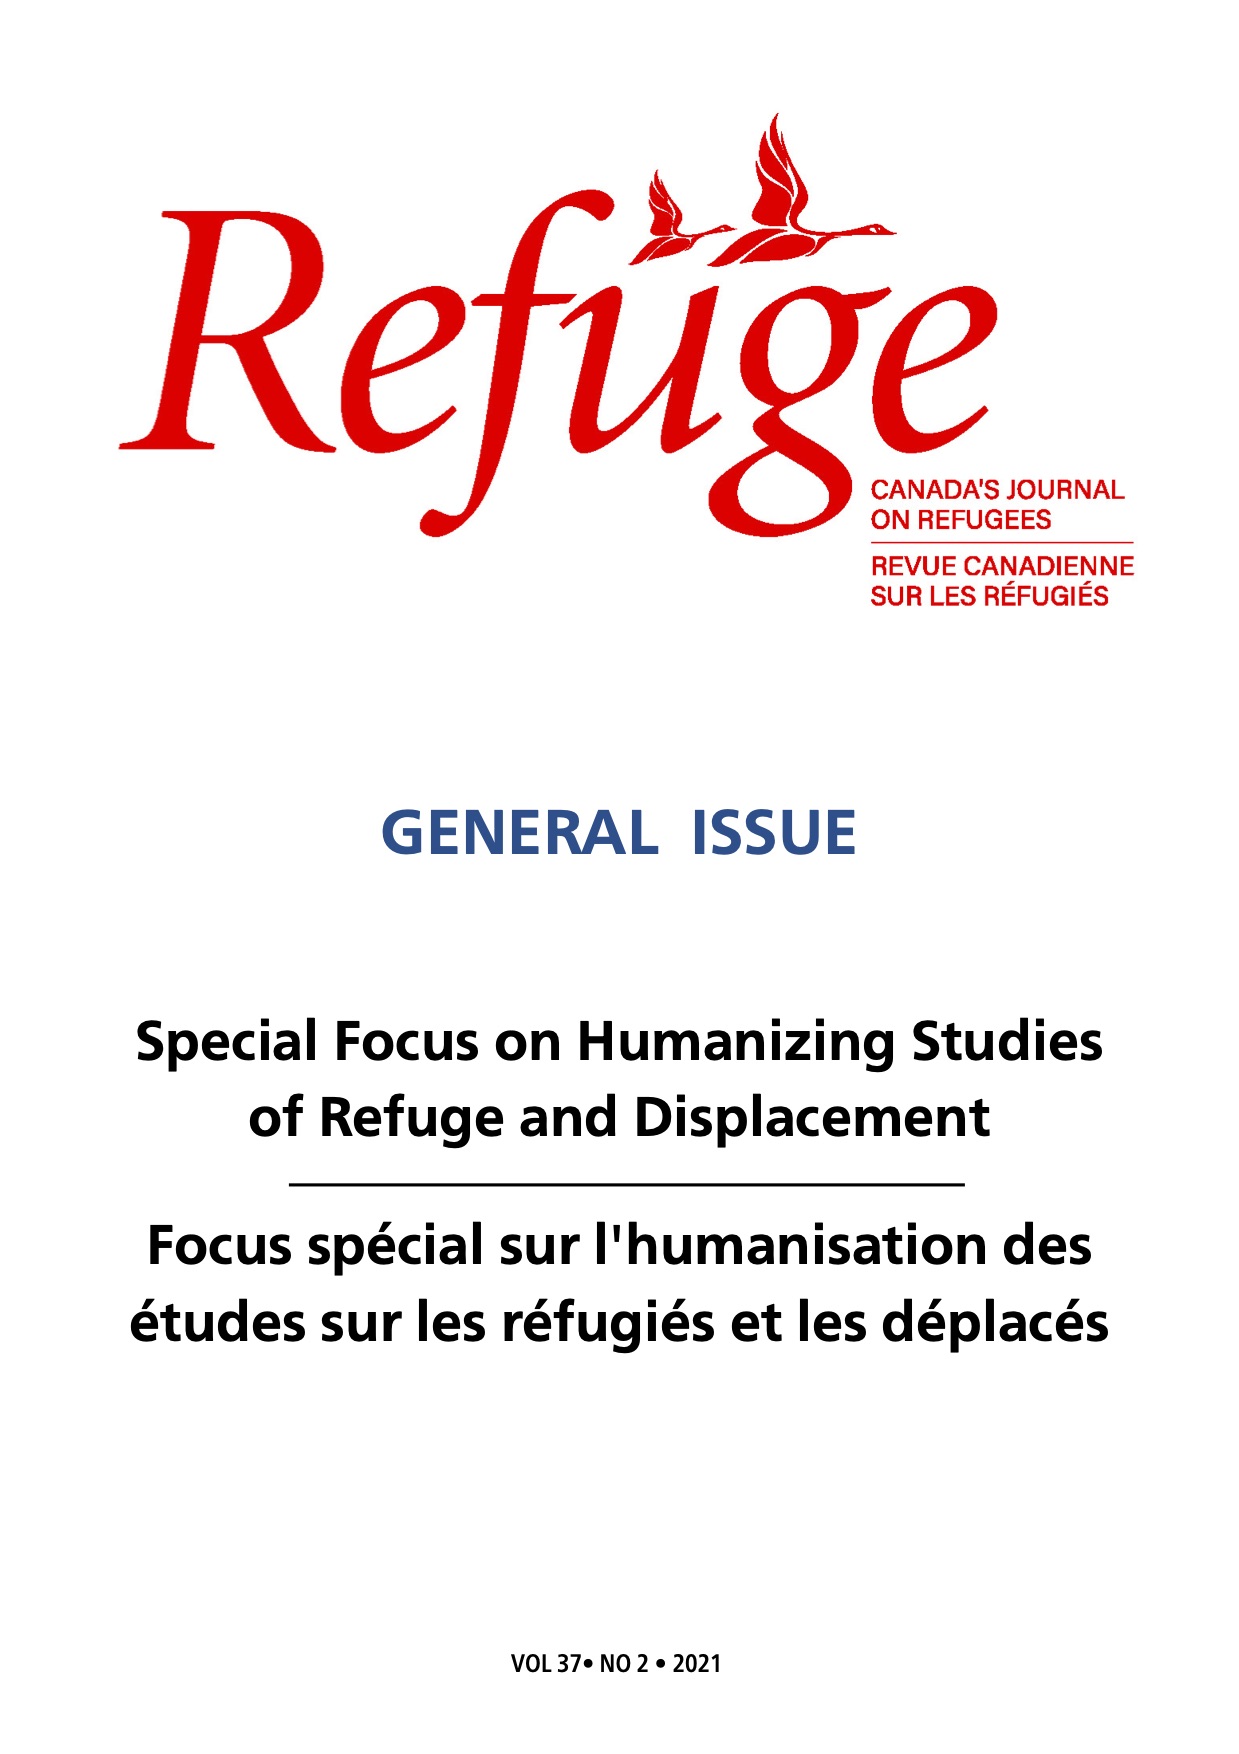 					View Vol. 37 No. 2 (2021): General Issue with Special Focus on Humanizing Studies of Refuge and Displacement
				